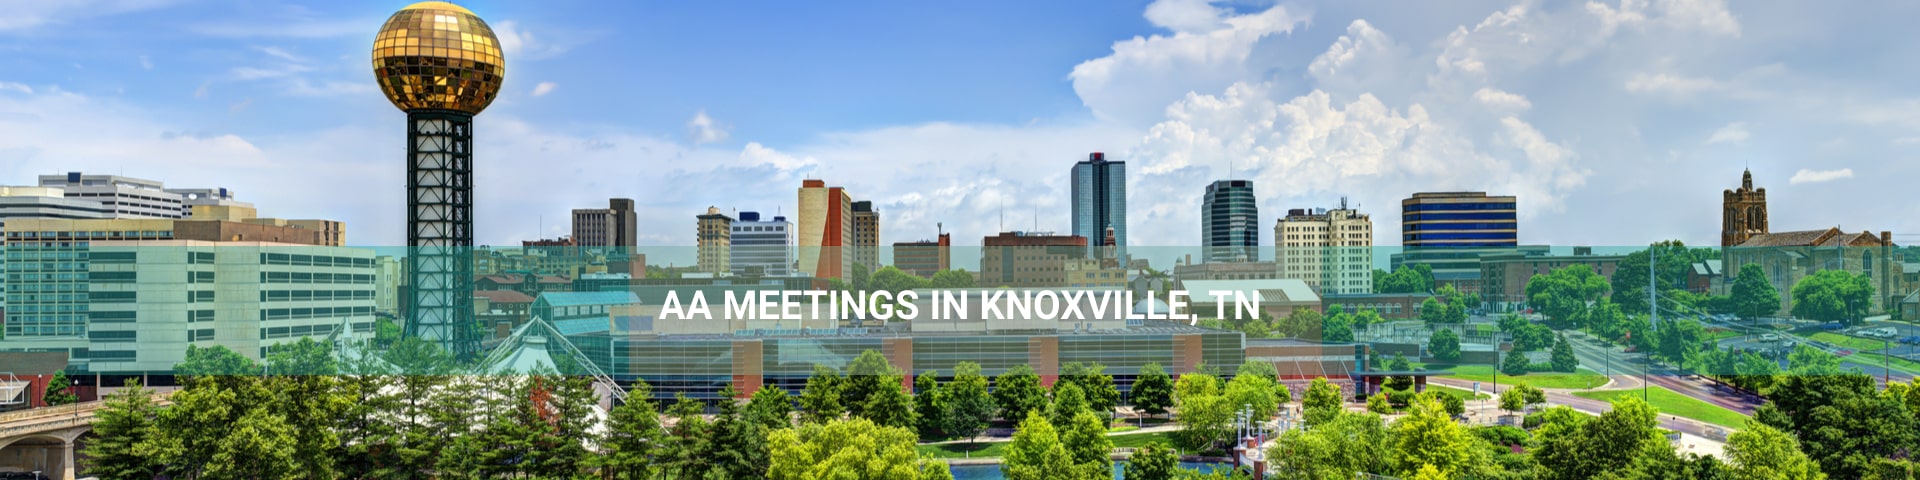 Knoxville, Tennessee city panorama.